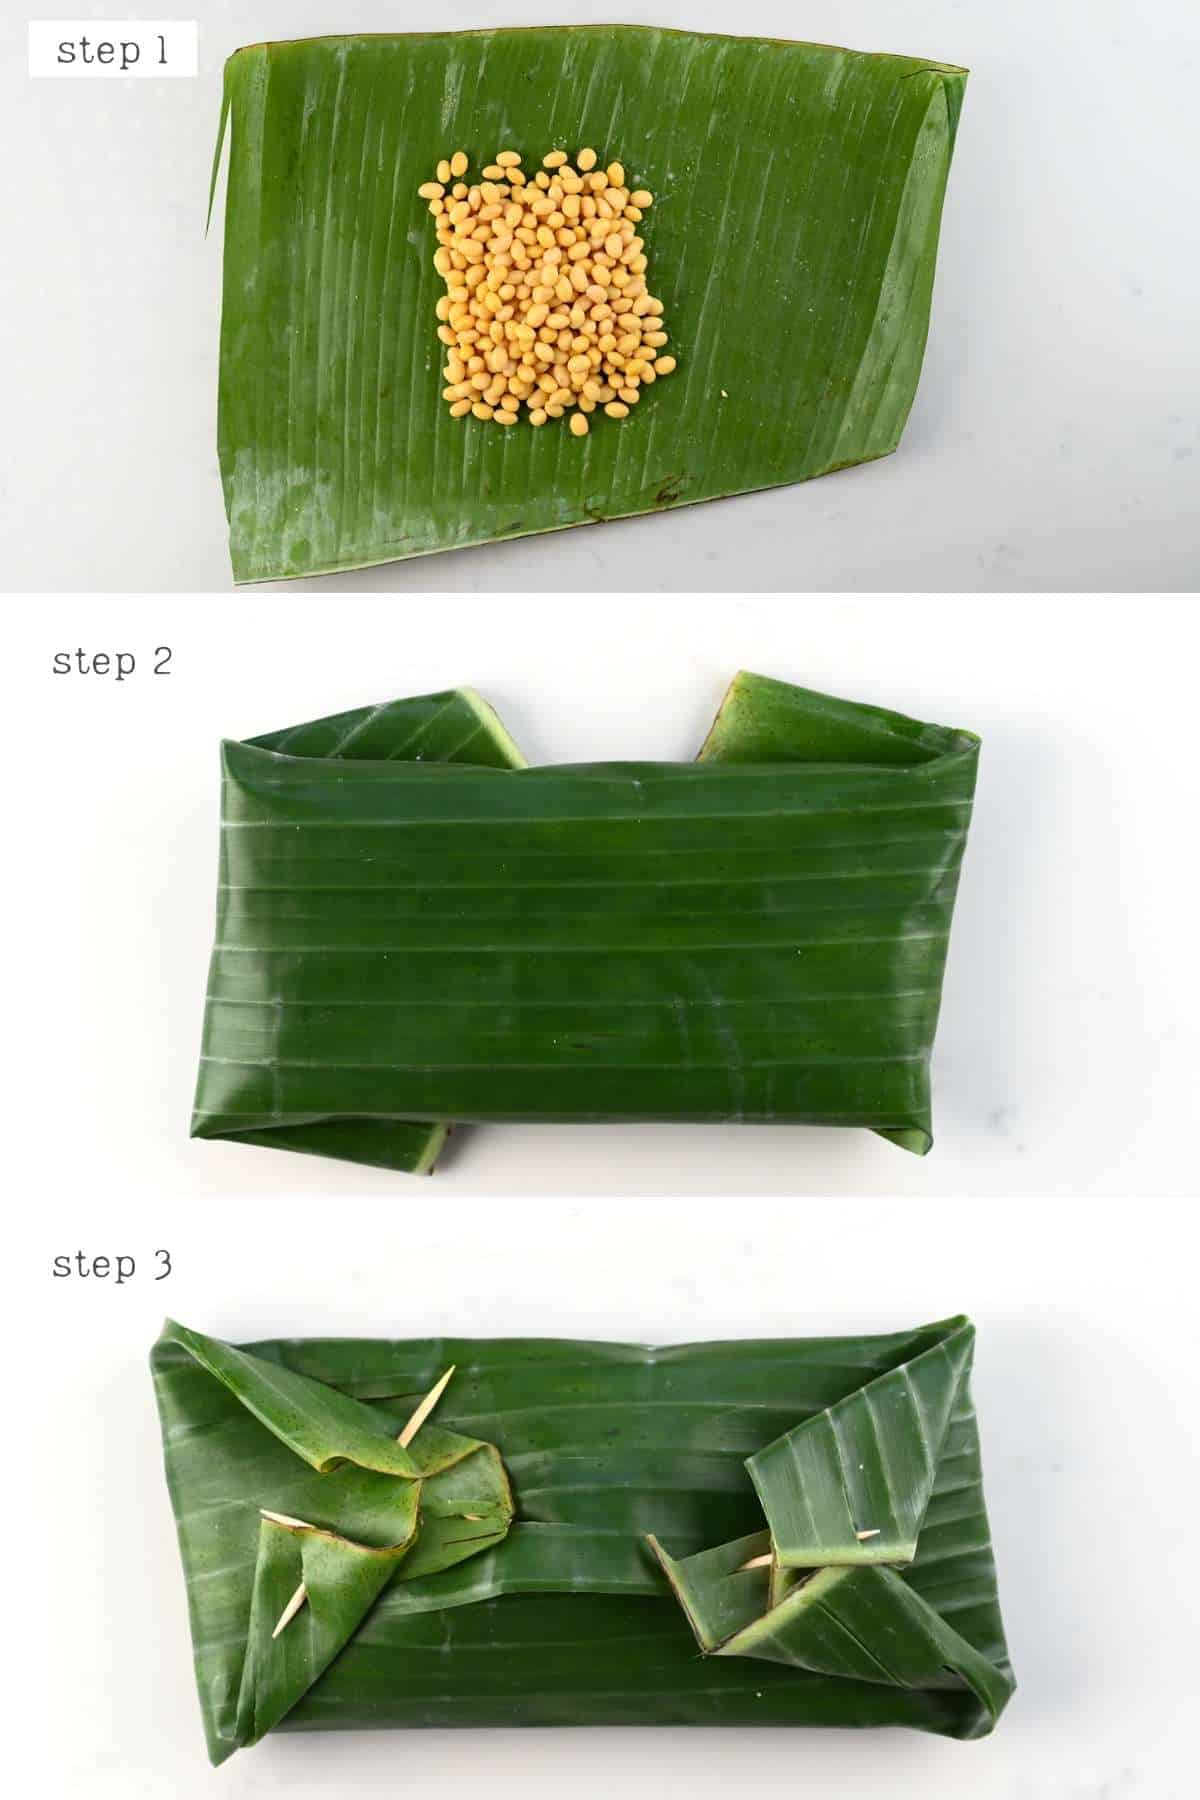 Steps for making tempeh parcels